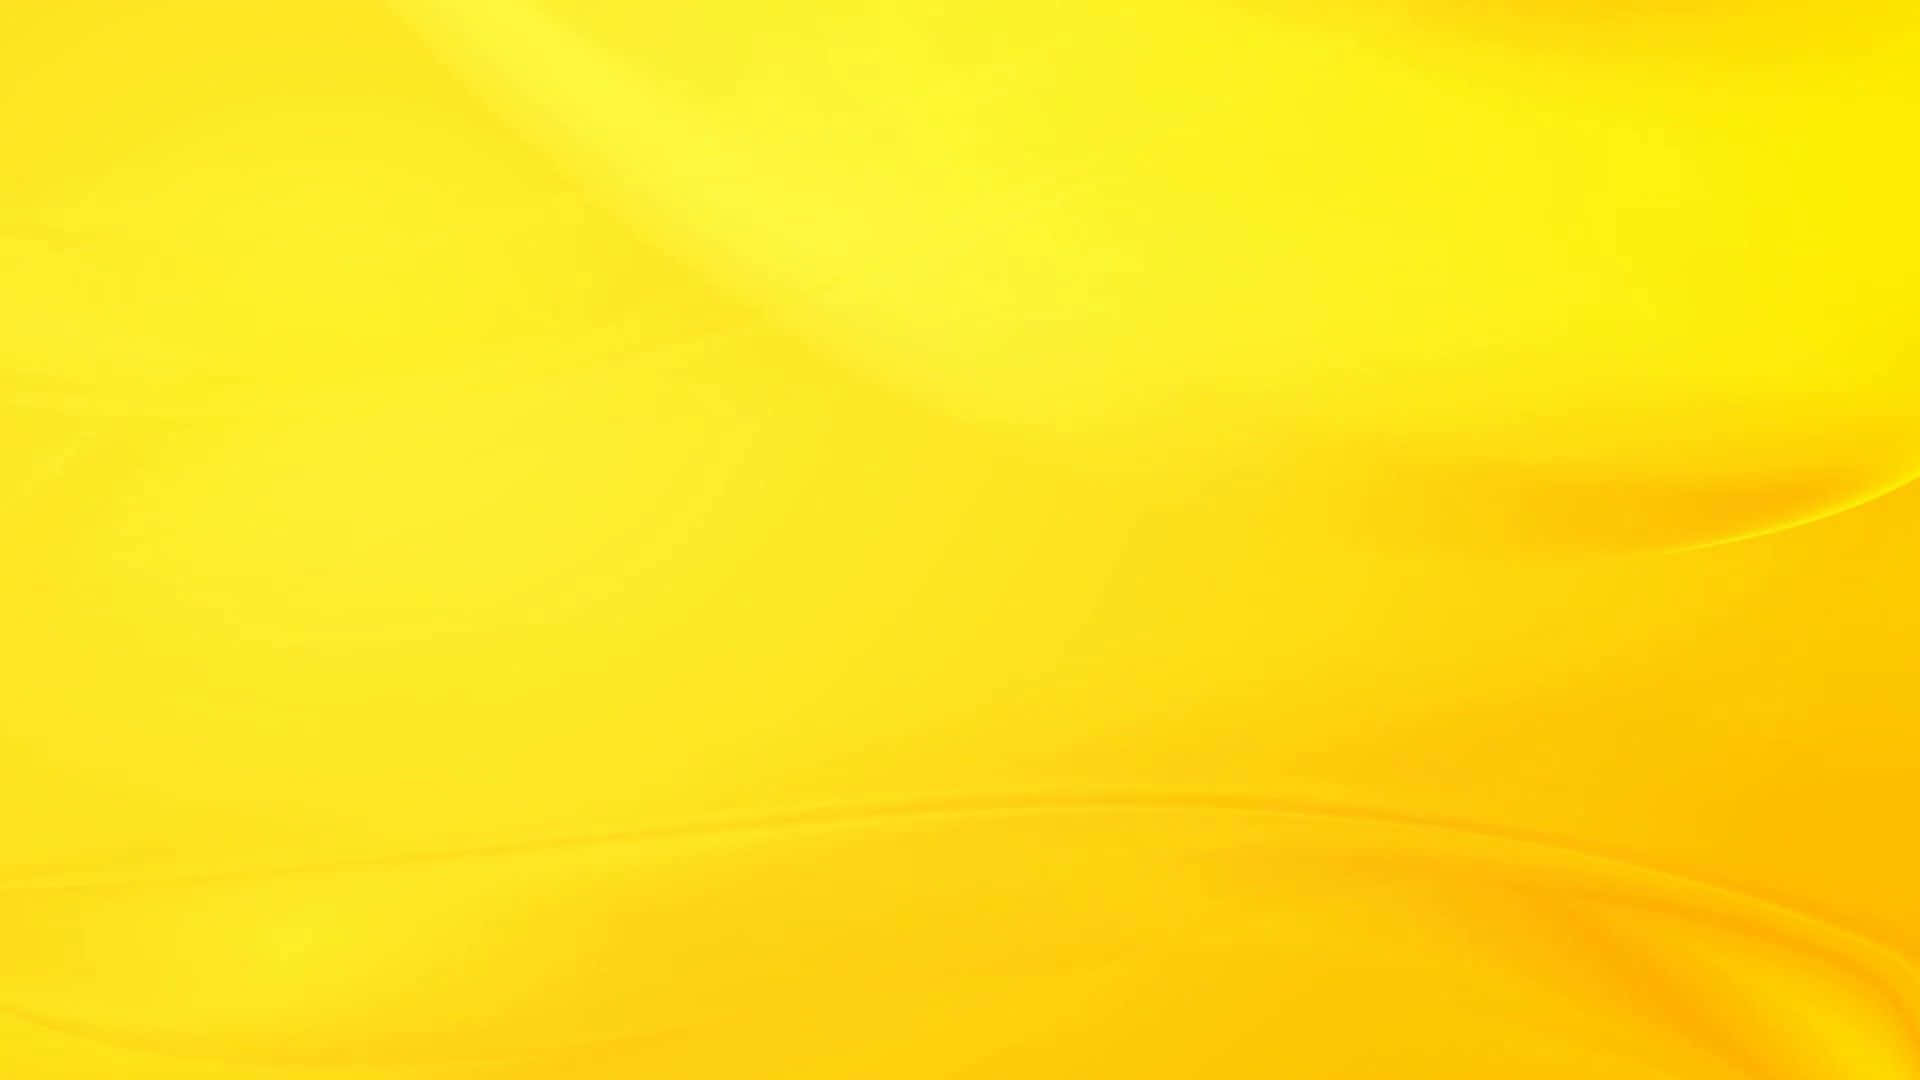 Get Started With This Pastel Yellow Laptop Wallpaper